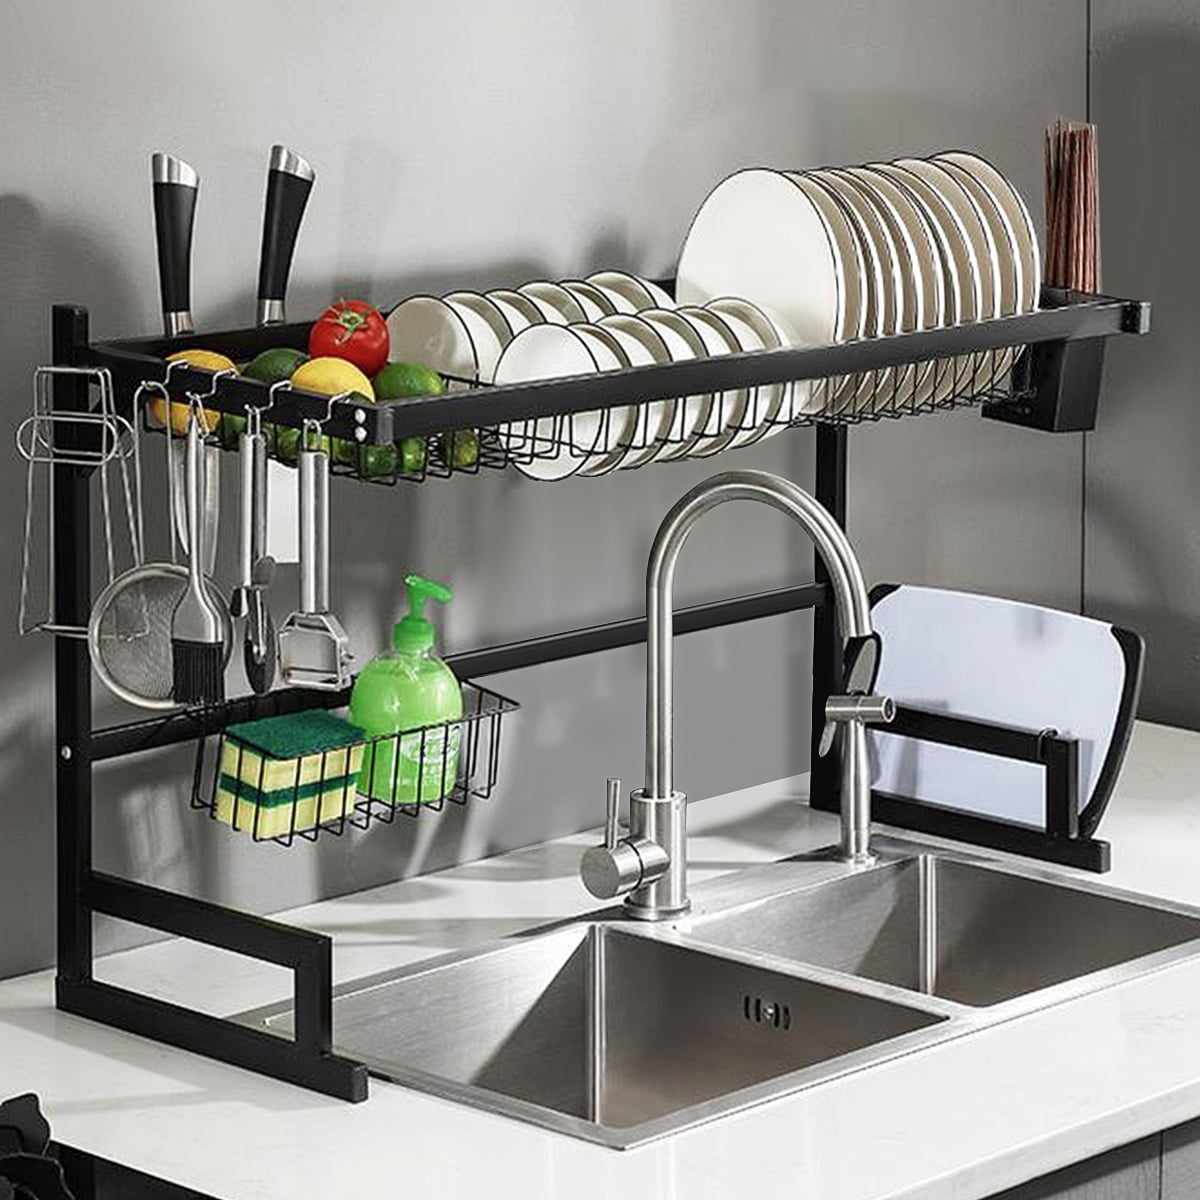 Stainless Steel 2 Tier Dish Drying Rack - Over Sink, Drainer Shelf Stainless Steel Over Sink Dish Rack